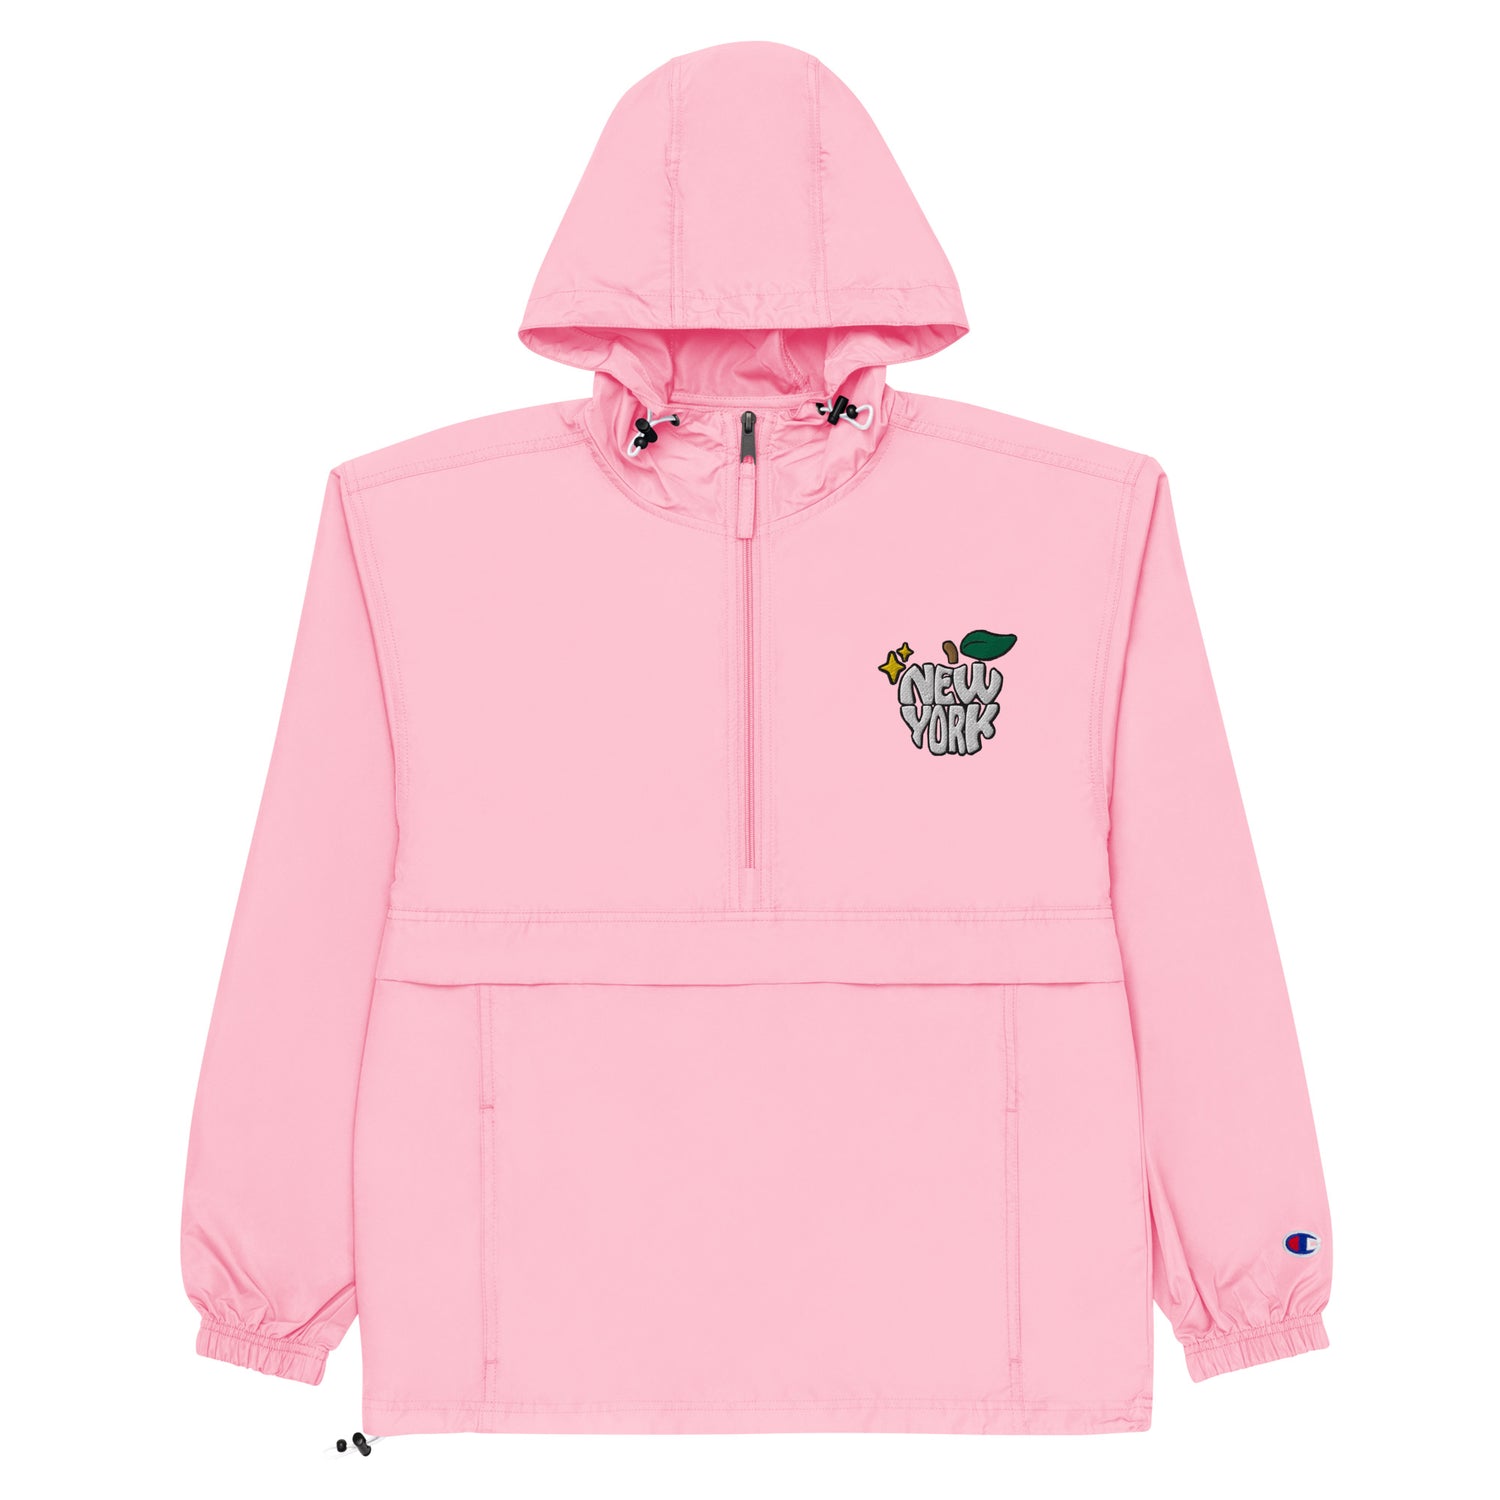 New York Apple Logo Embroidered Pink Champion Packable Windbreaker Jacket Scattered Streetwear